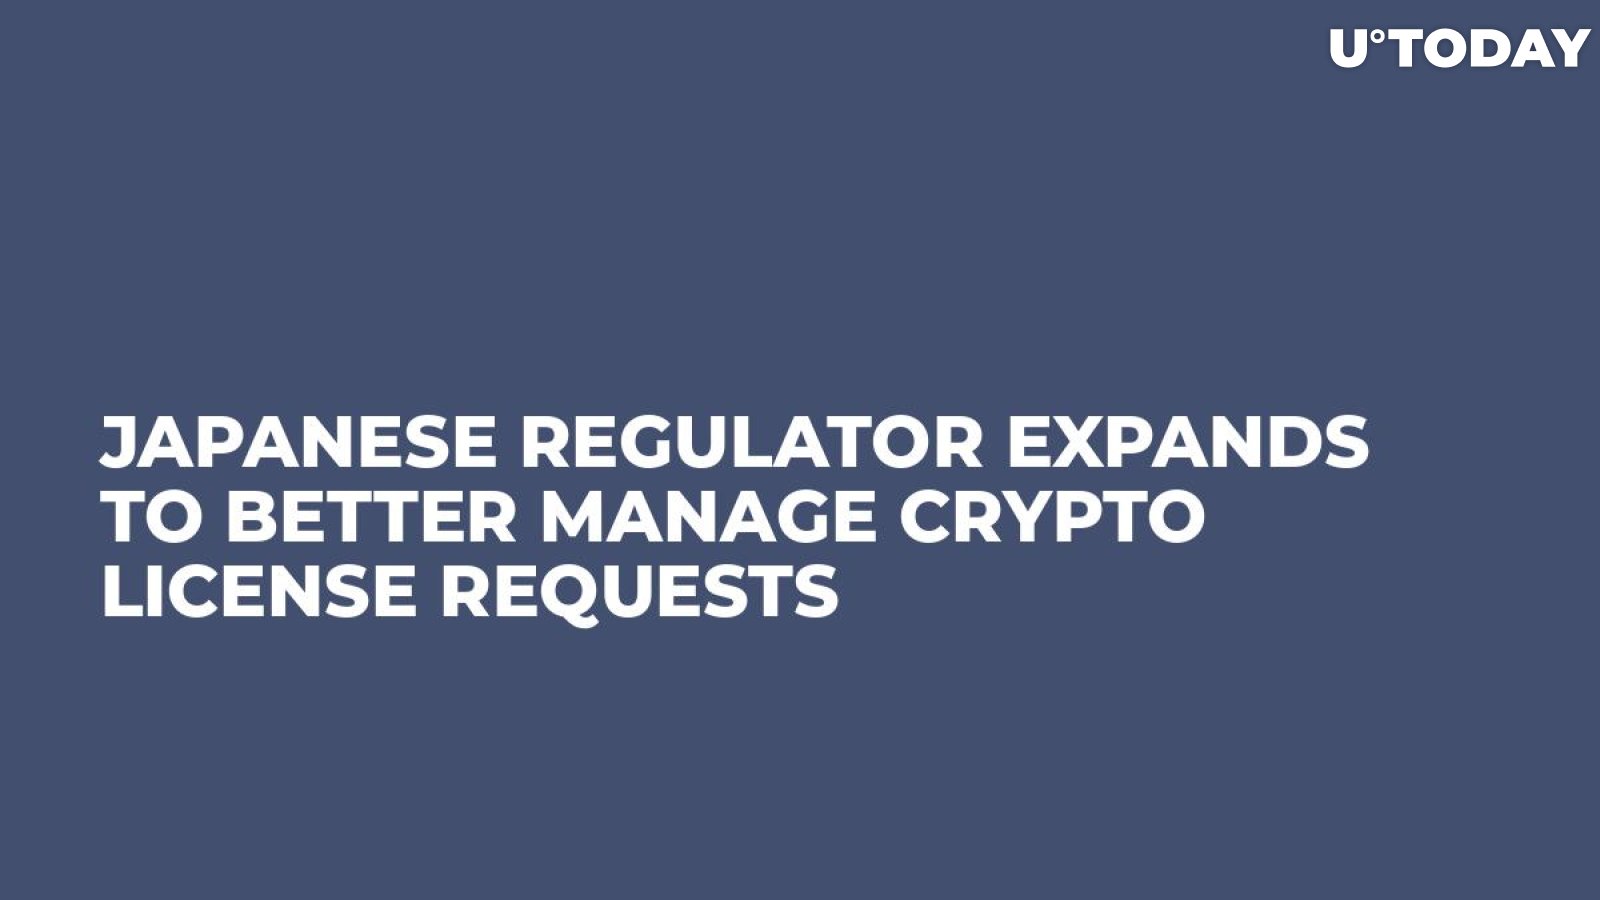 Japanese Regulator Expands to Better Manage Crypto License Requests